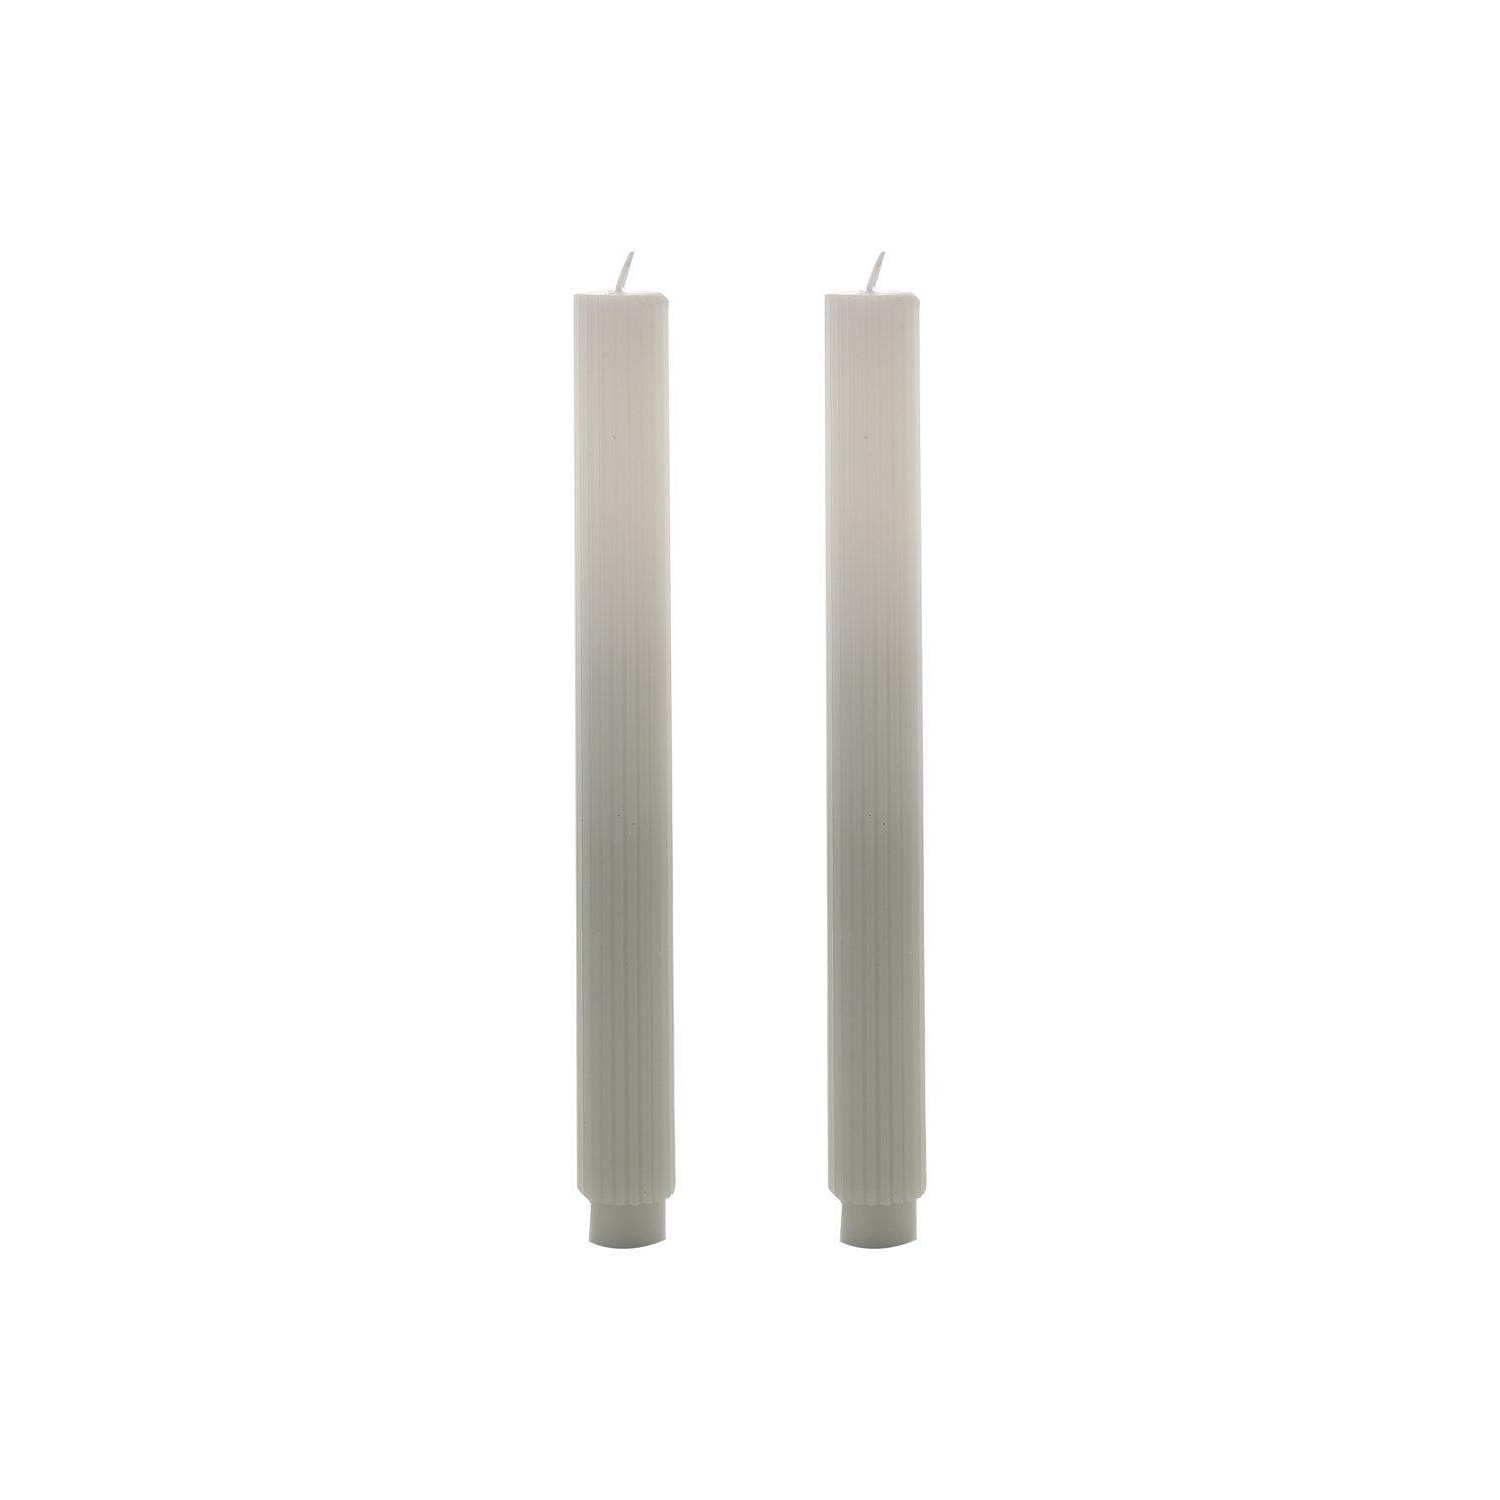 Set of 2 Ombre Dinner Candles - Taupe/White - image 1